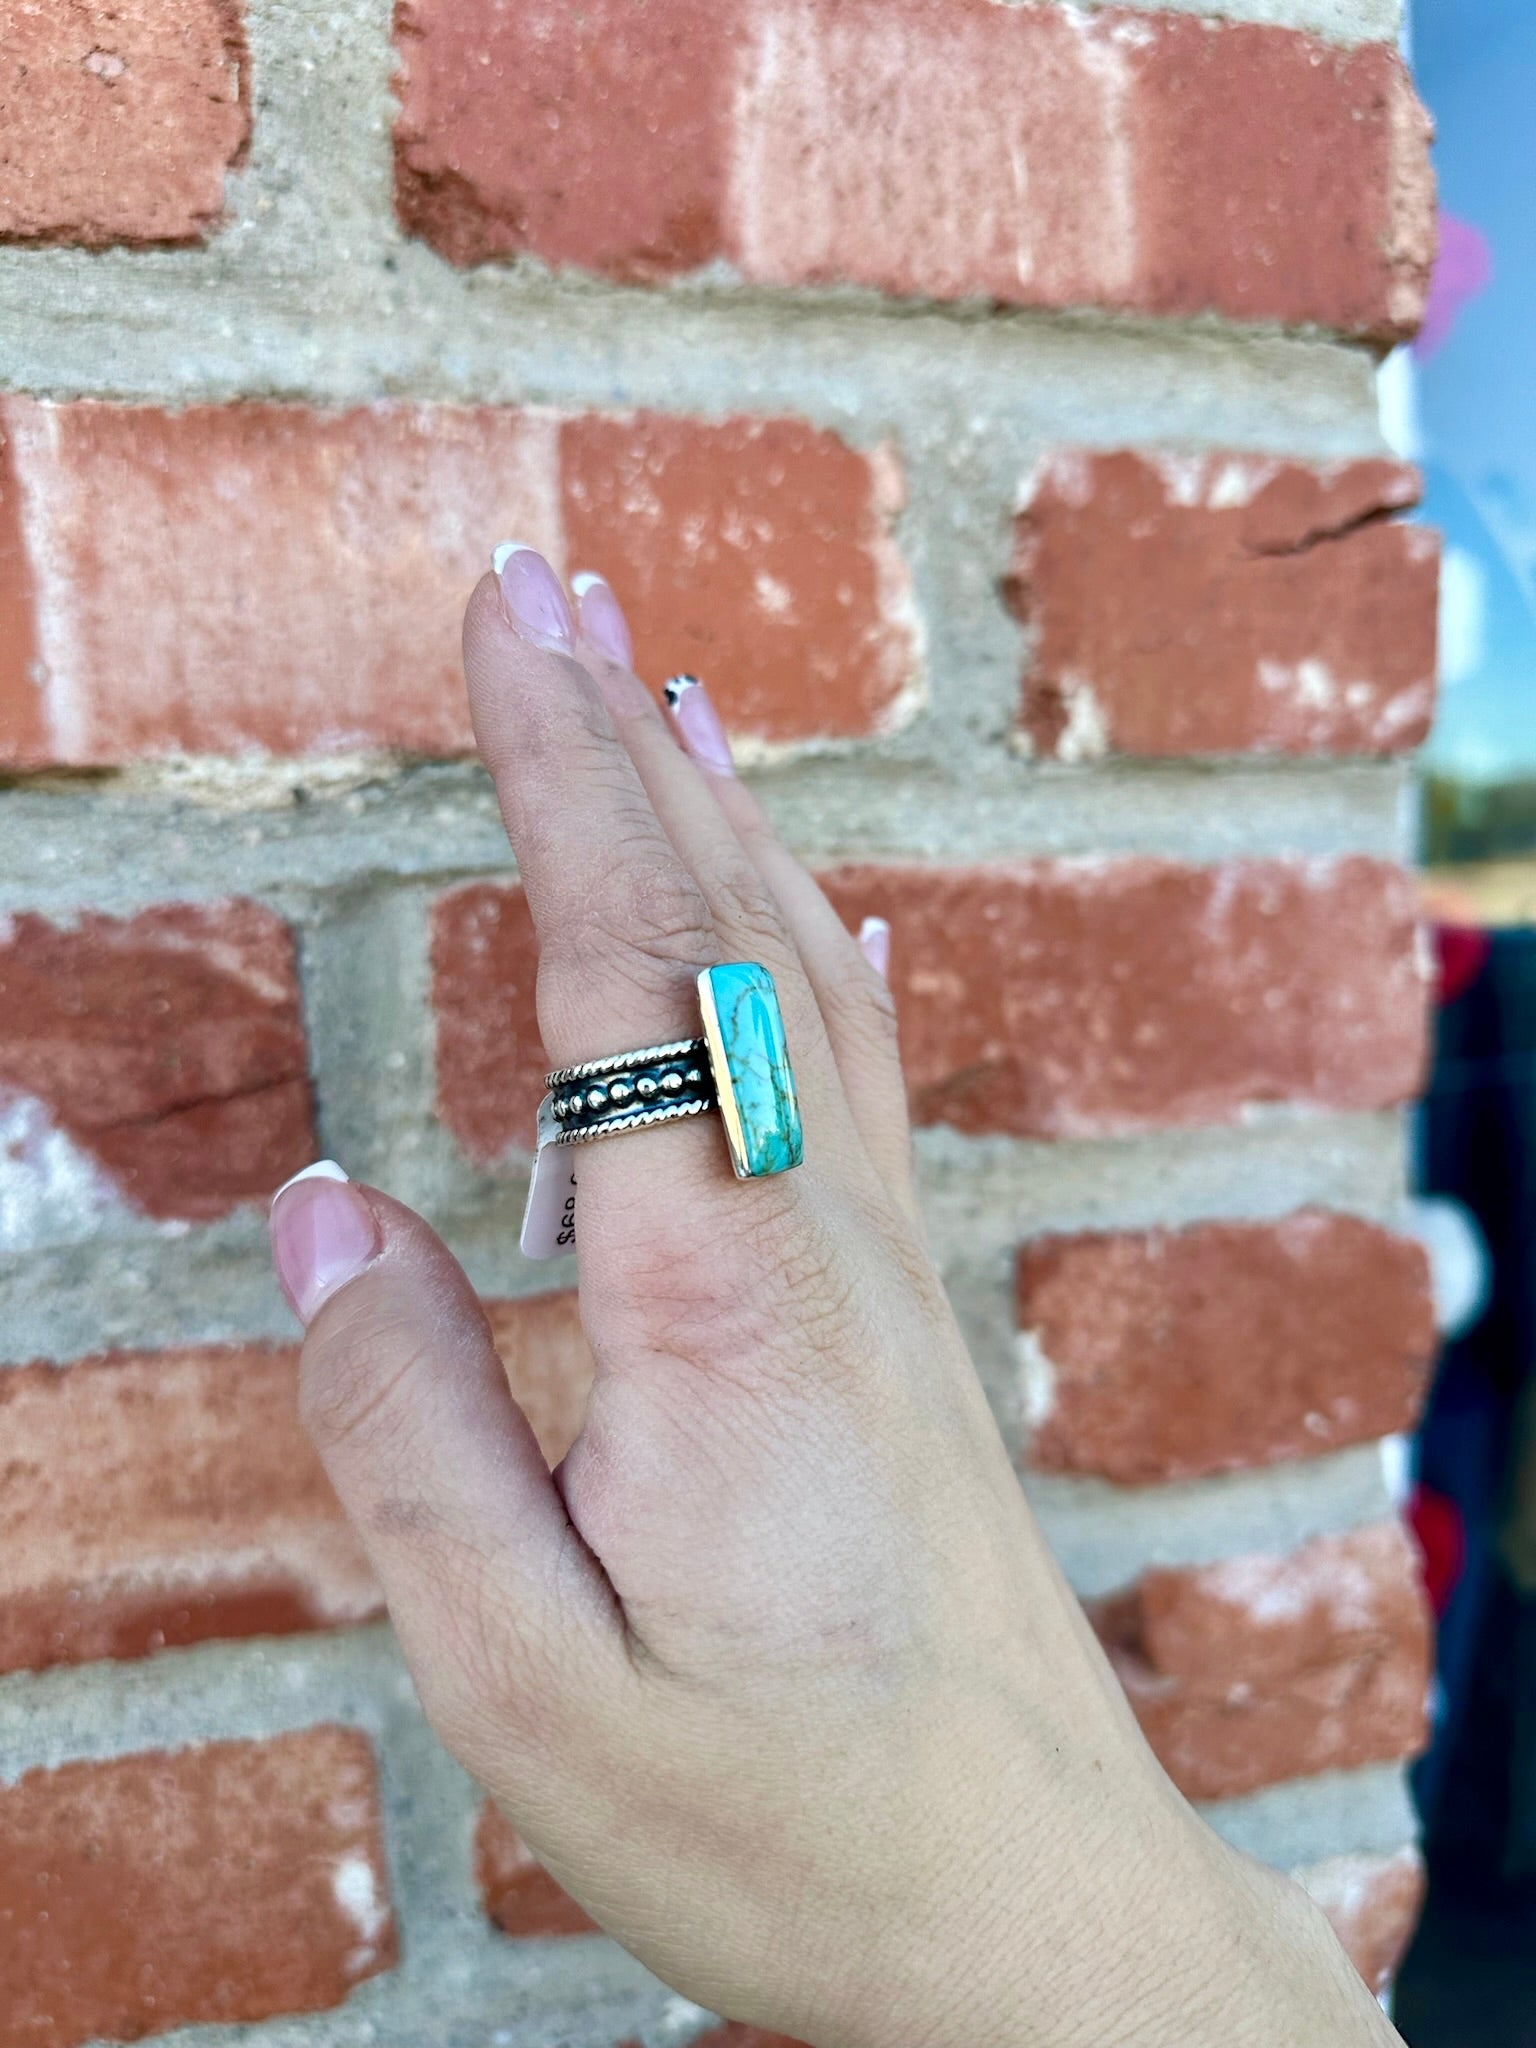 The Jayne Turquoise Ring